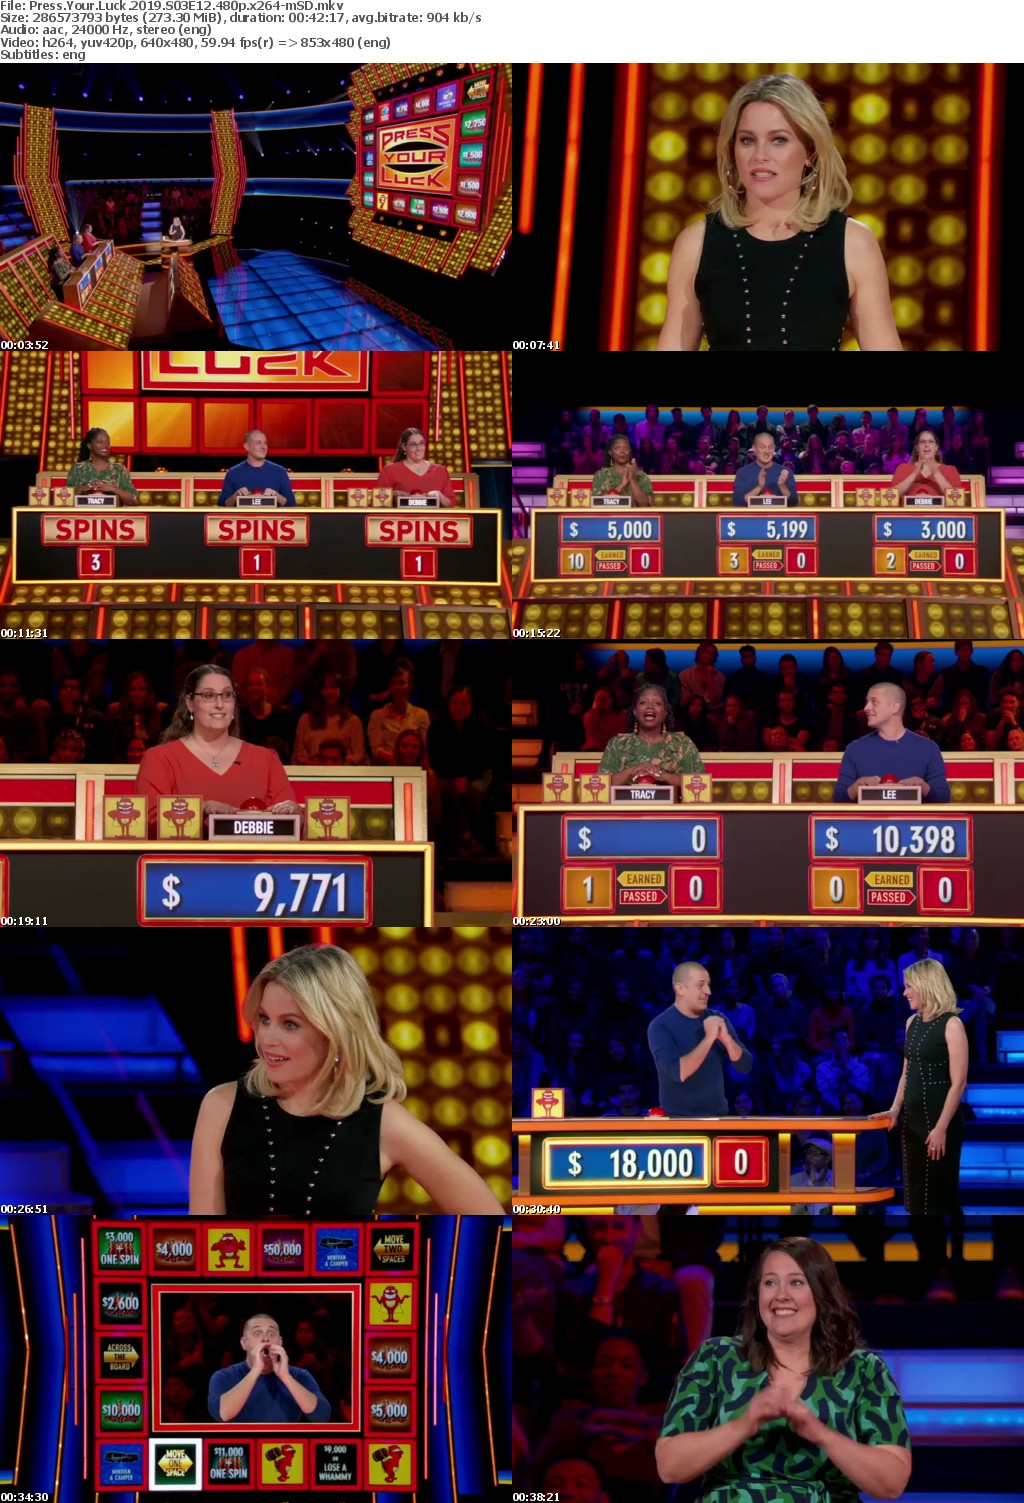 Press Your Luck 2019 S03E12 480p x264-mSD